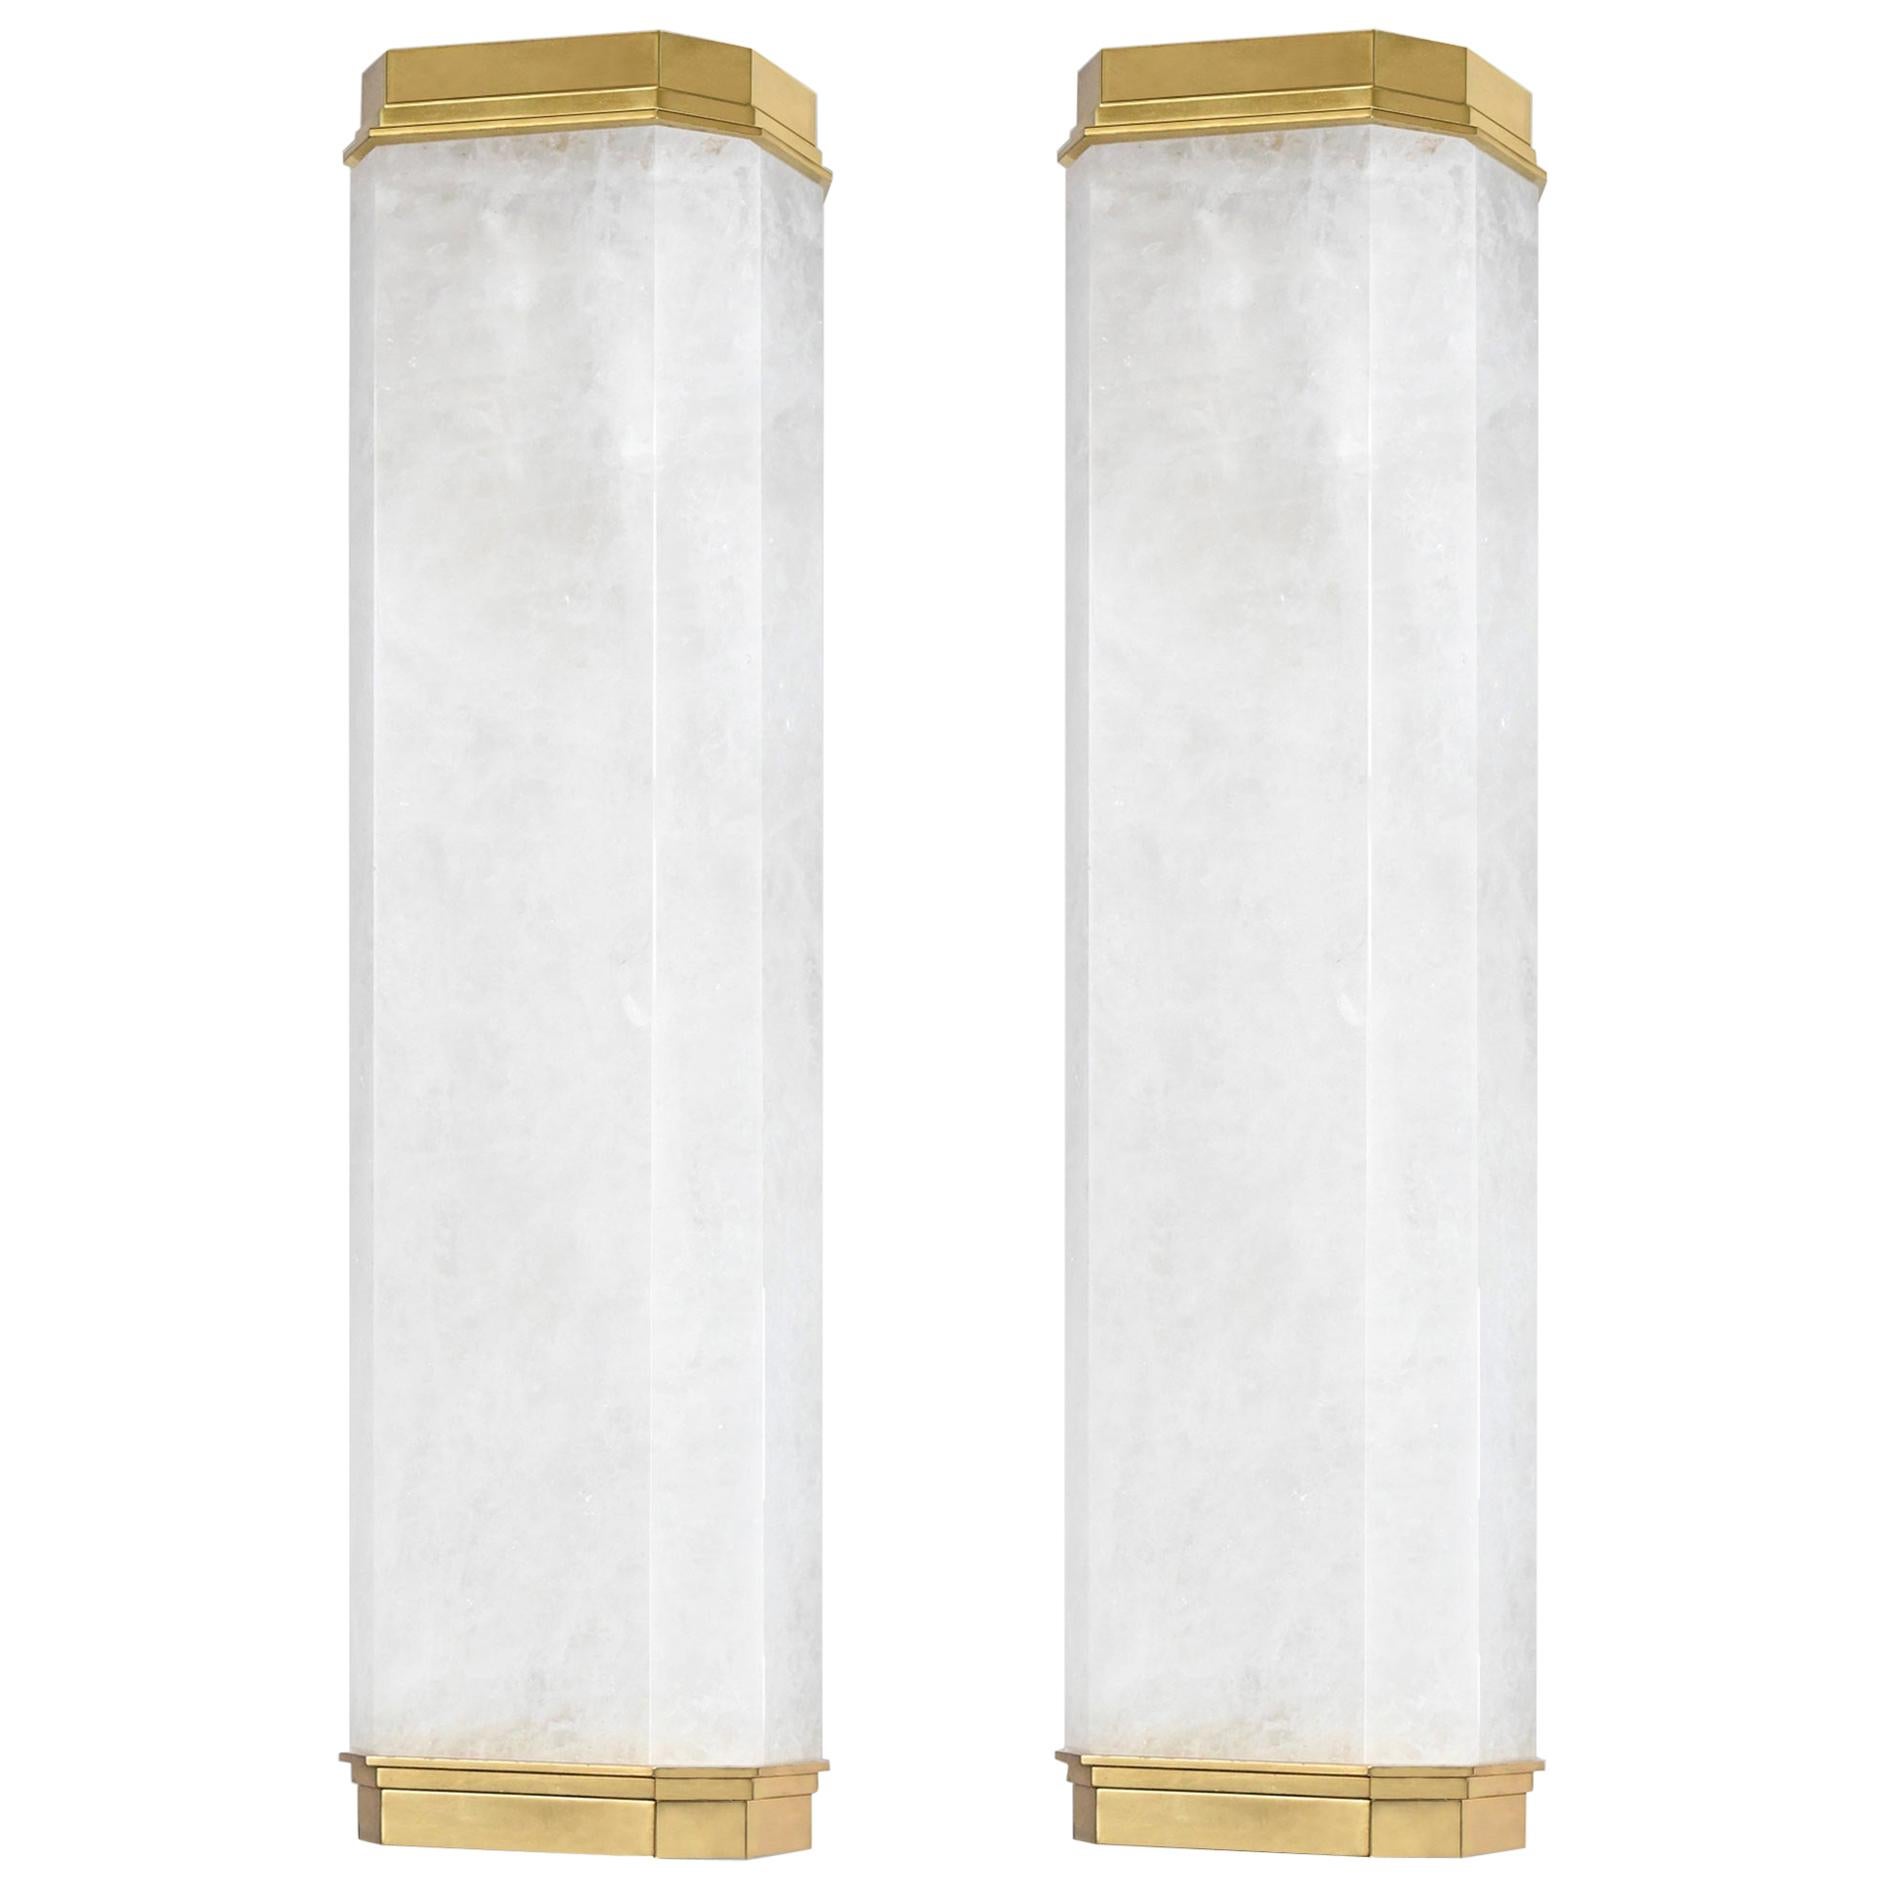 Pair of rock crystal sconces with polished brass decoration. Created by Phoenix Gallery.
Each sconce installed with two E26 sockets. Use two 80 watts long tube LED warm light lightbulbs. 160w total.
 